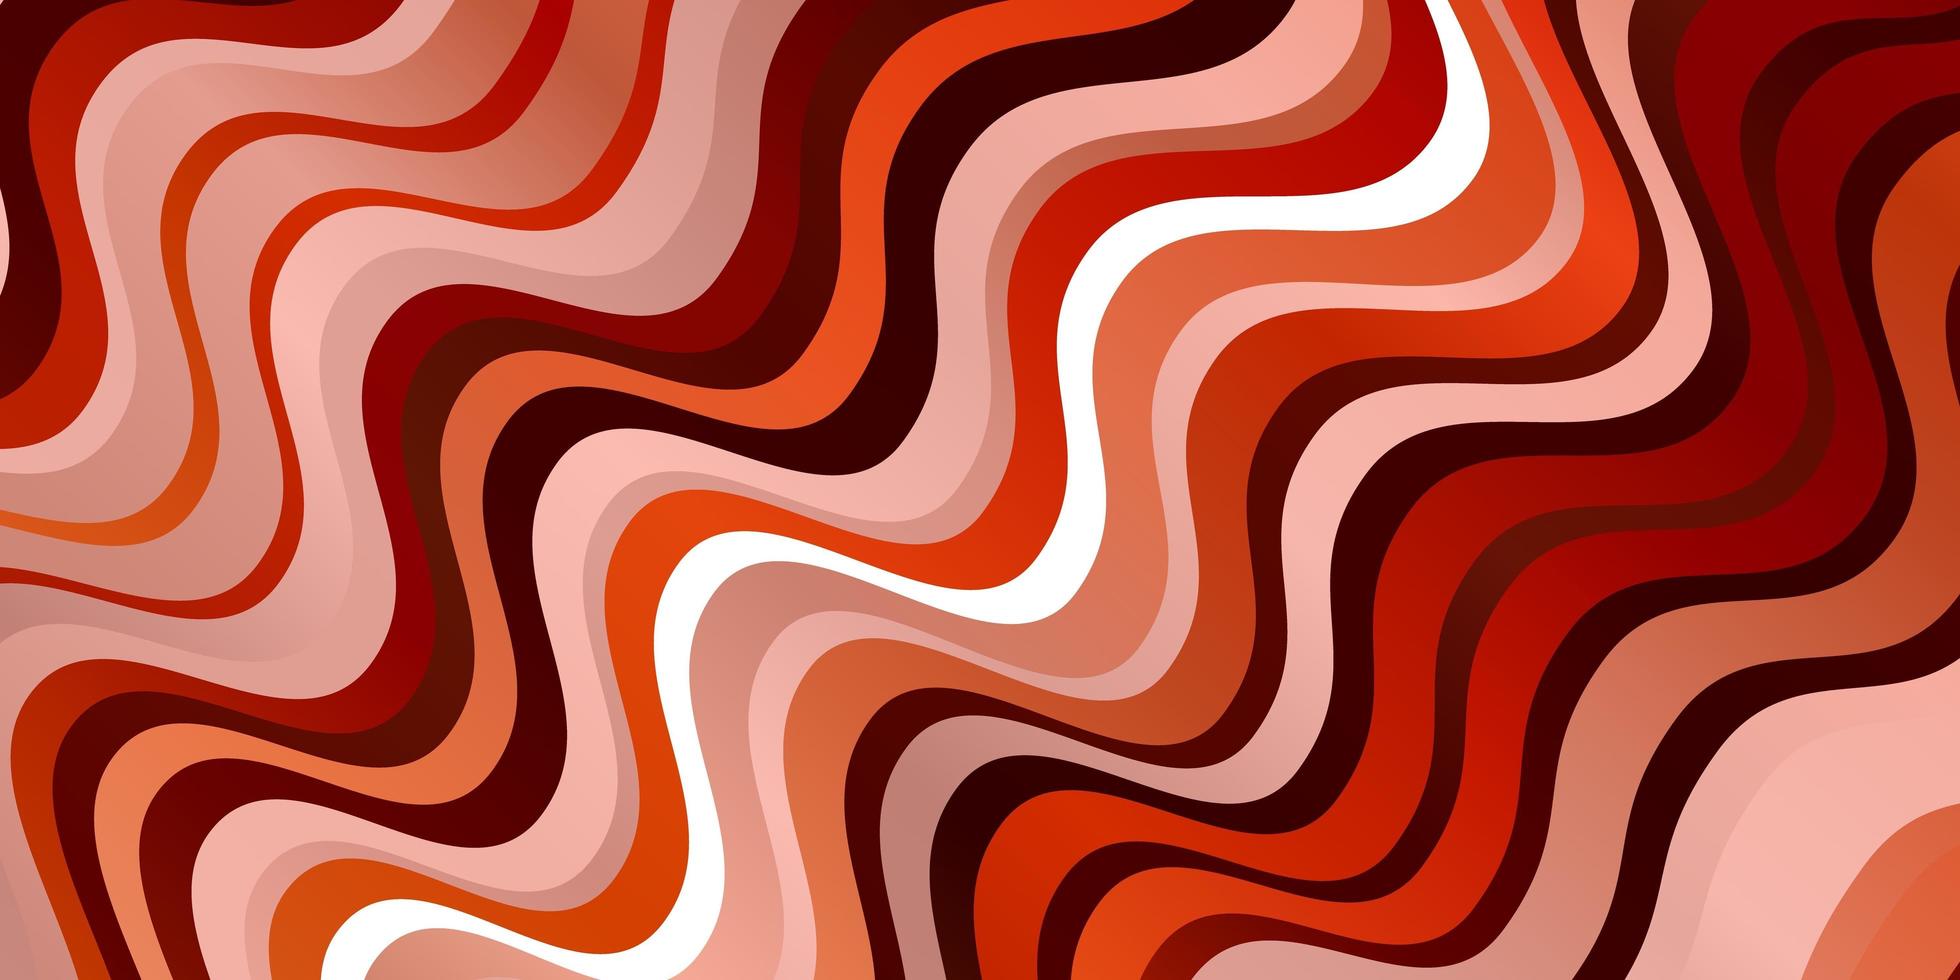 Light Orange vector background with wry lines. Abstract illustration with bandy gradient lines. Template for cellphones.